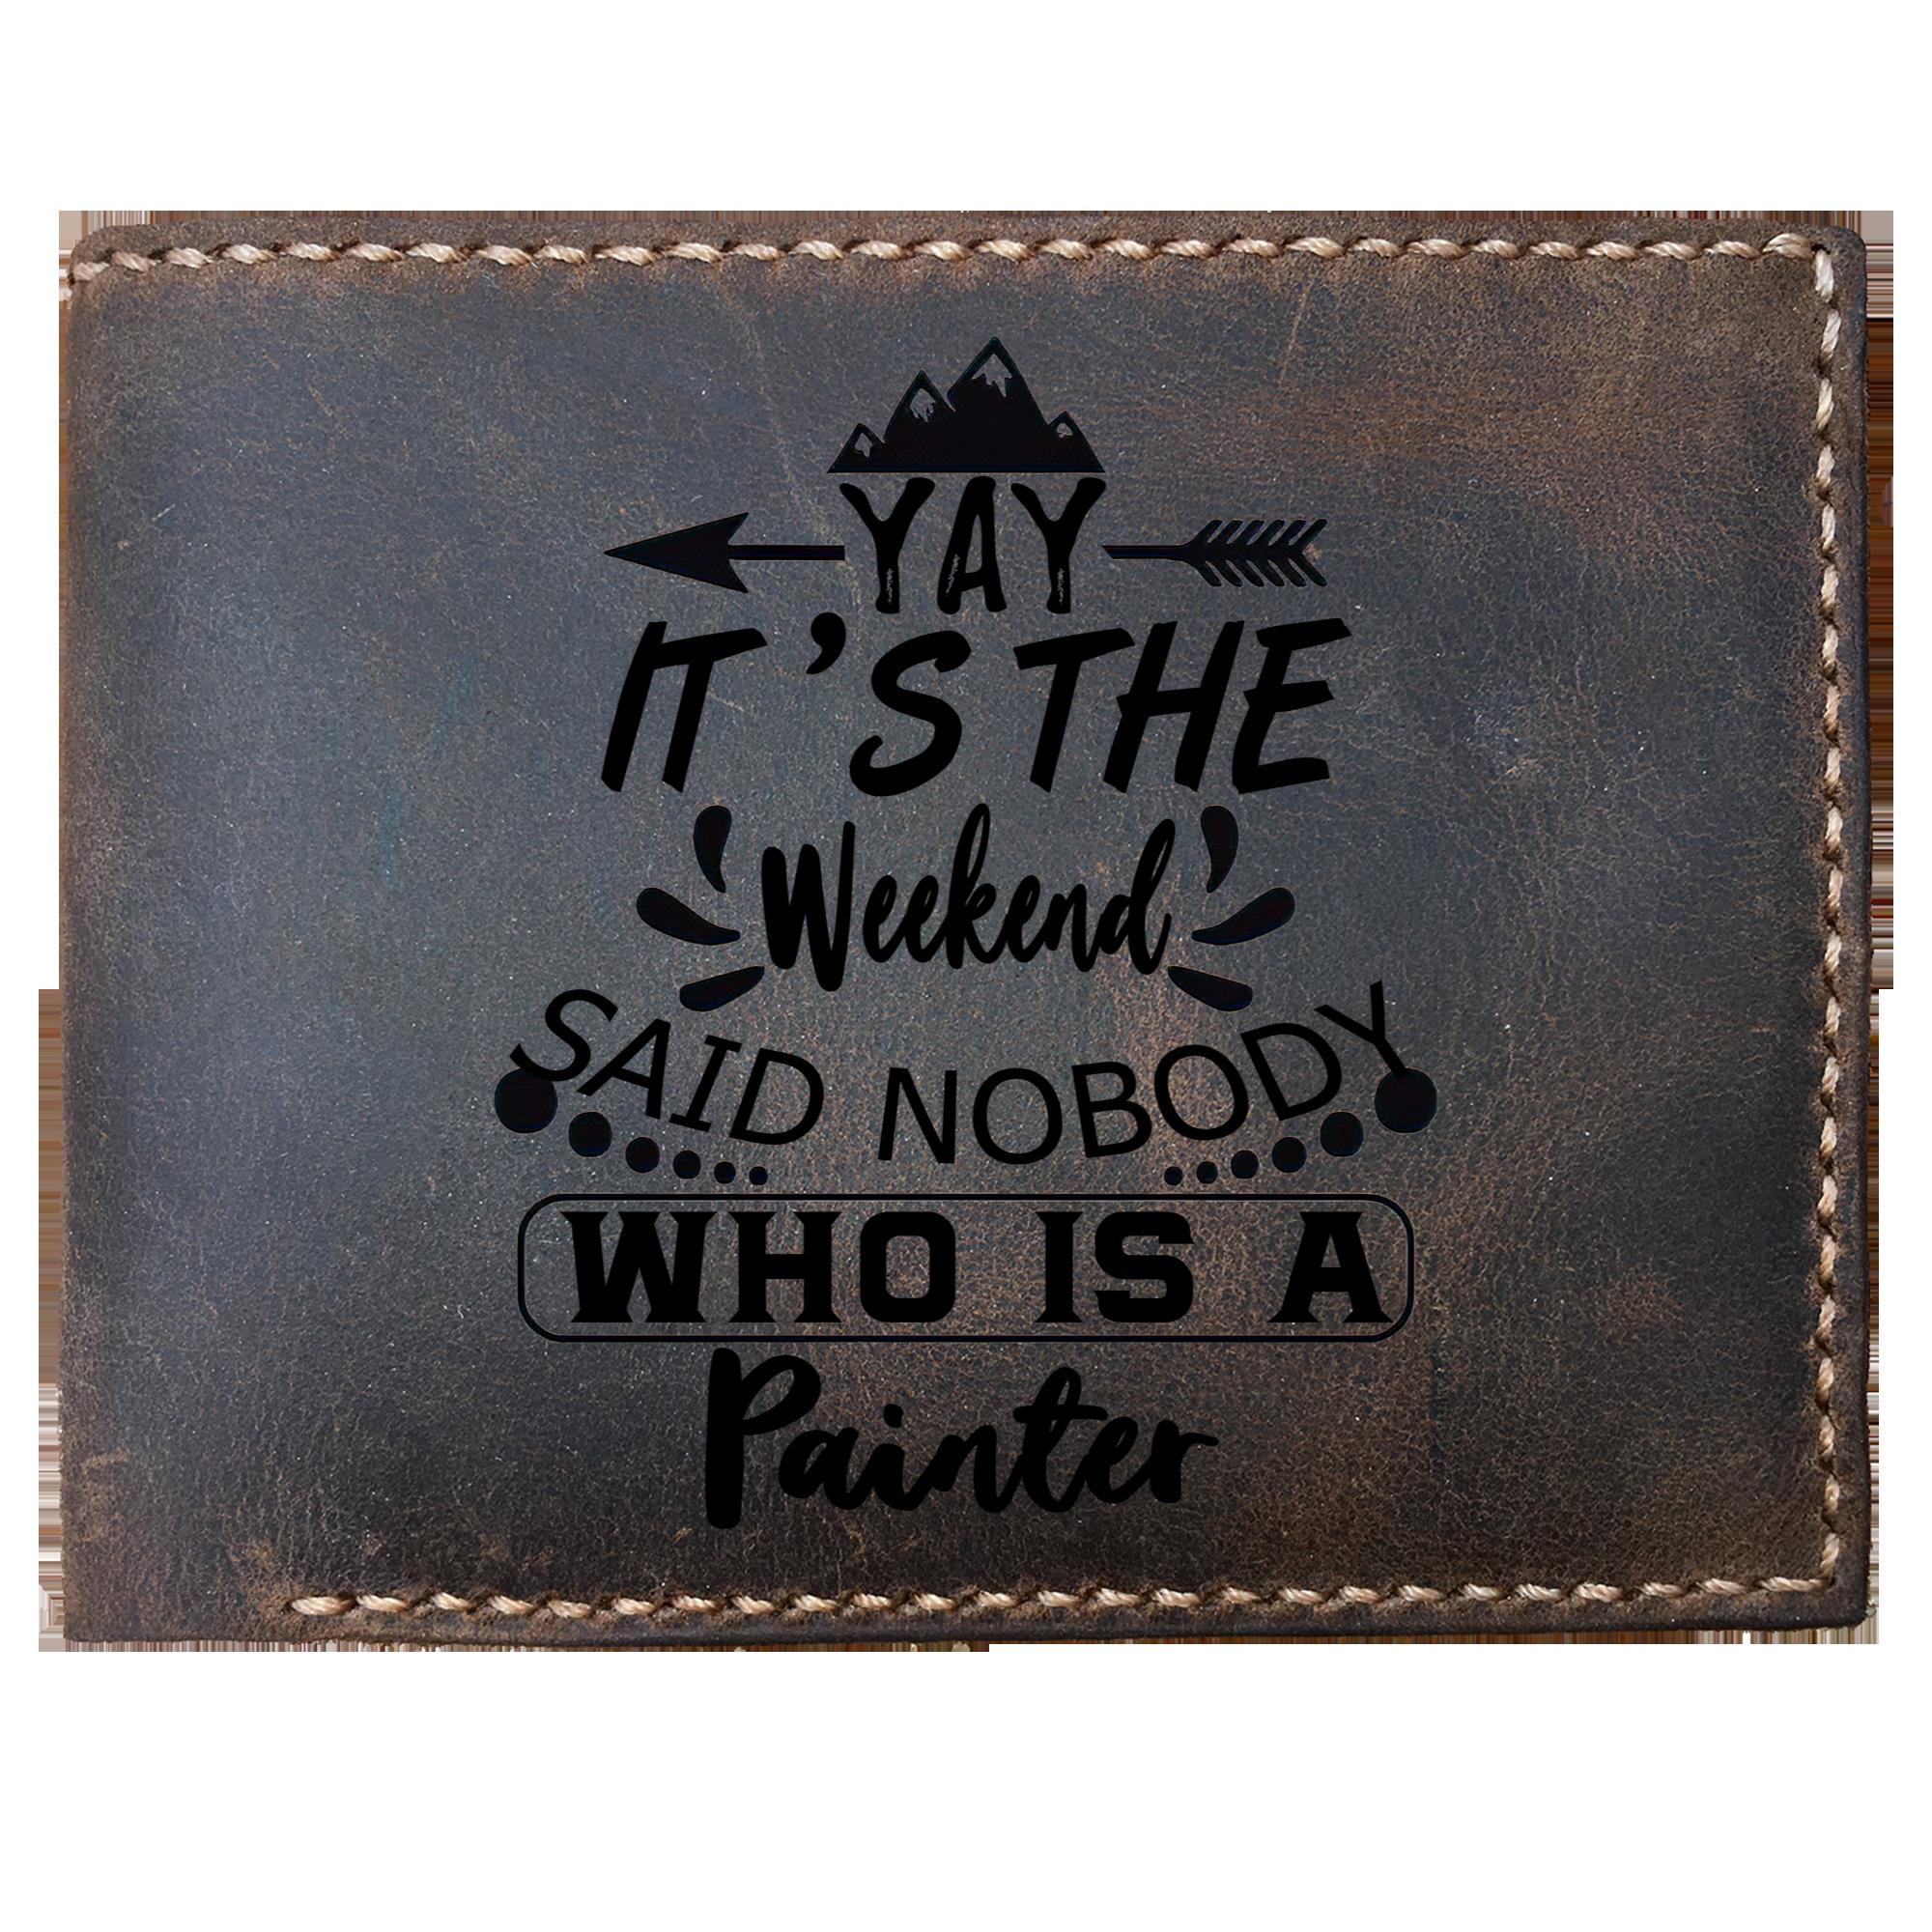 Skitongifts Funny Custom Laser Engraved Bifold Leather Wallet For Men, It's The Weekend Said Nobody Who Is A Painter, Father's Day Gifts